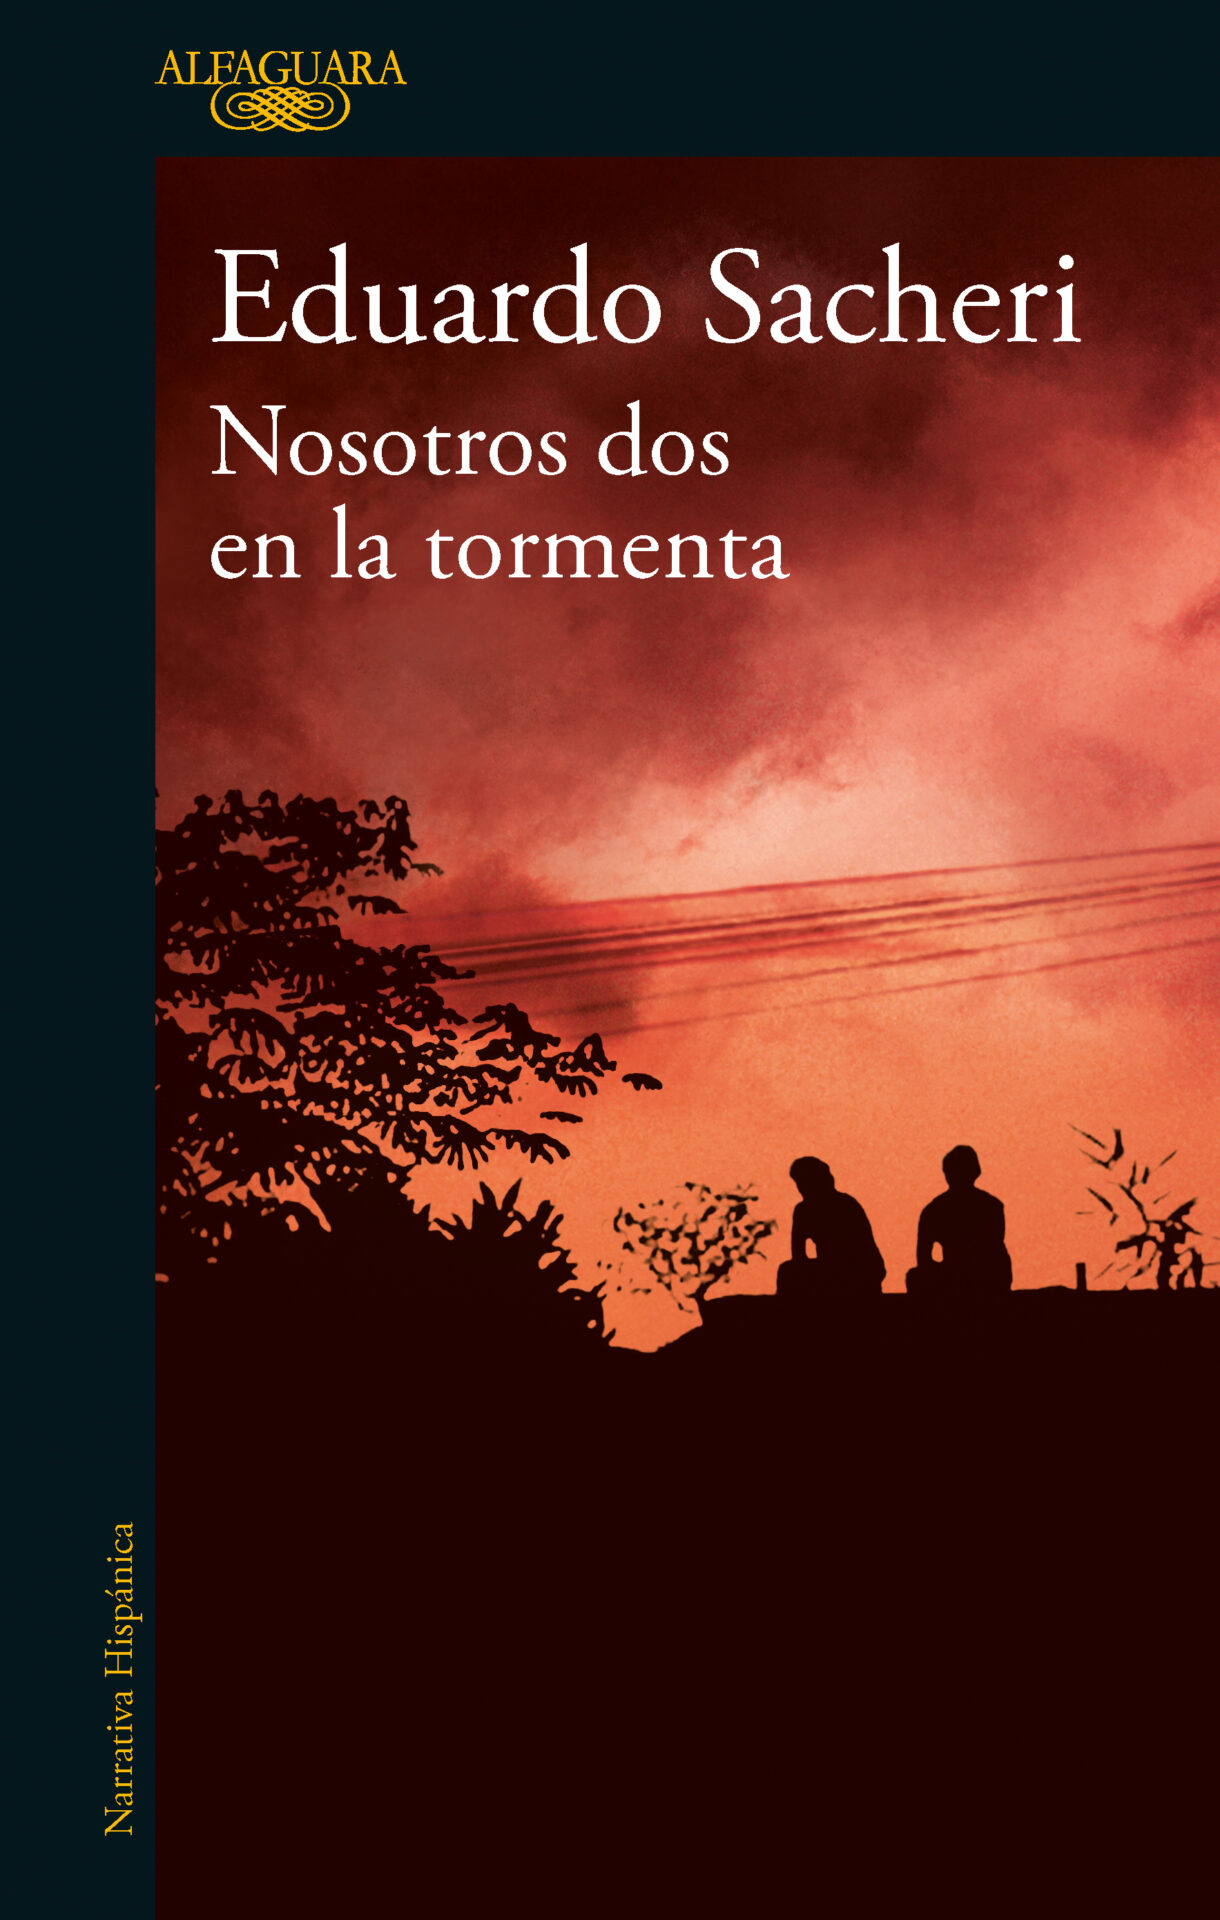 The Meaning of Many Deaths: An Interview with Eduardo Sacheri on Nosotros dos en la tormenta